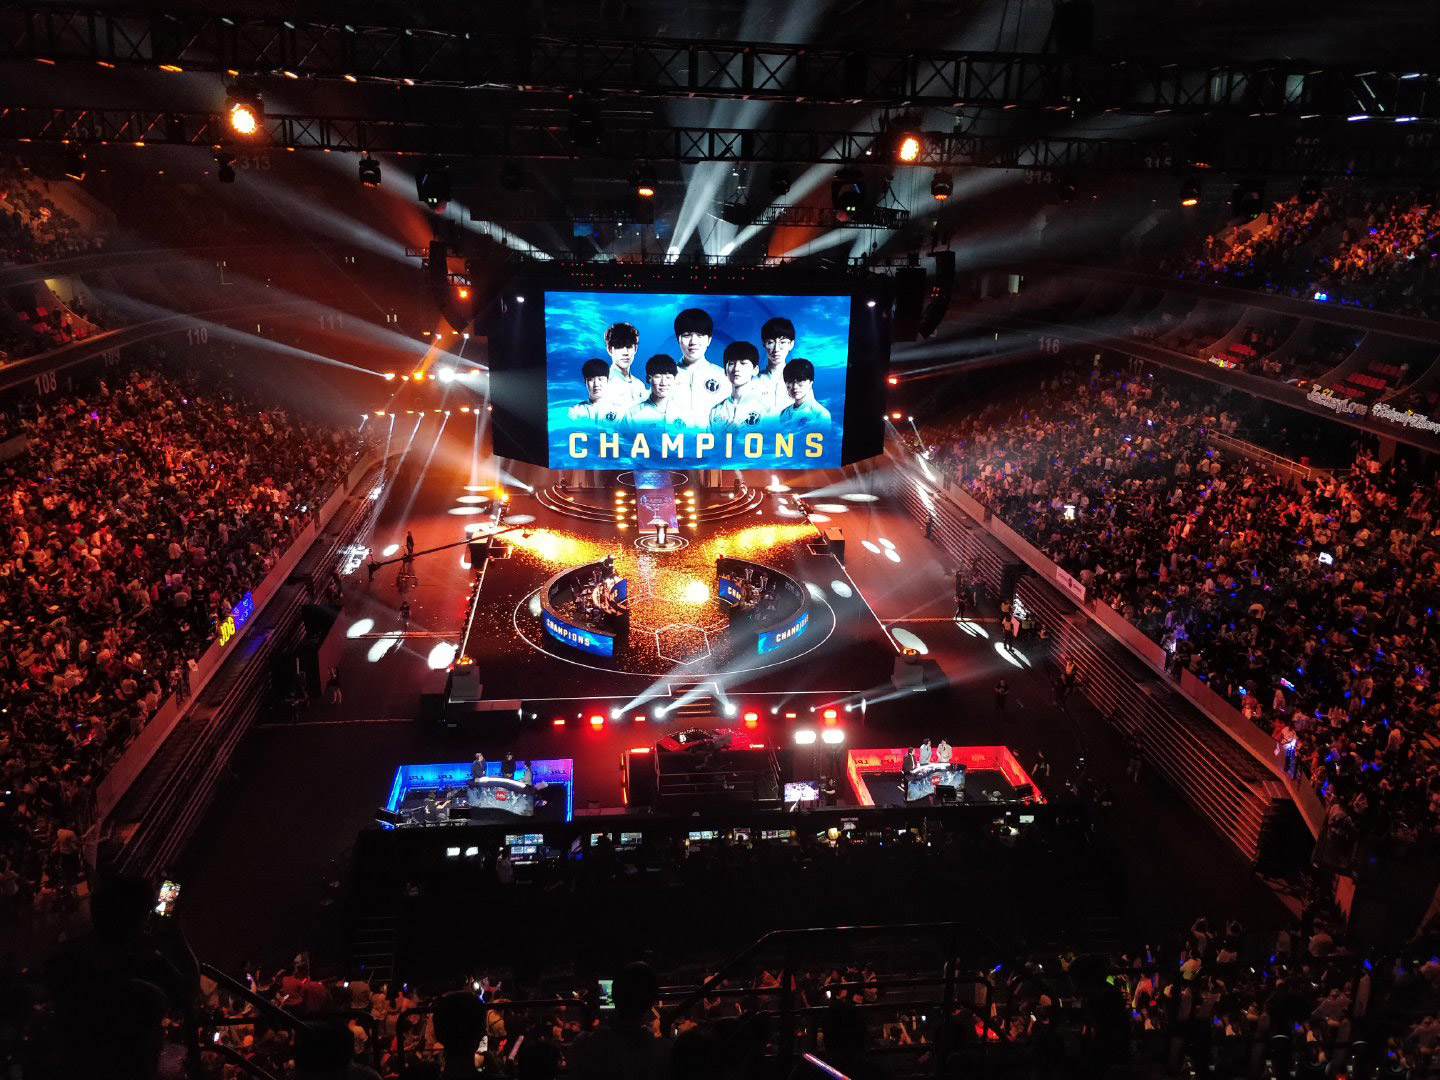 Another Large-scale E-sports matches redefined by Lightlink 350sqm carbon fiber series once again